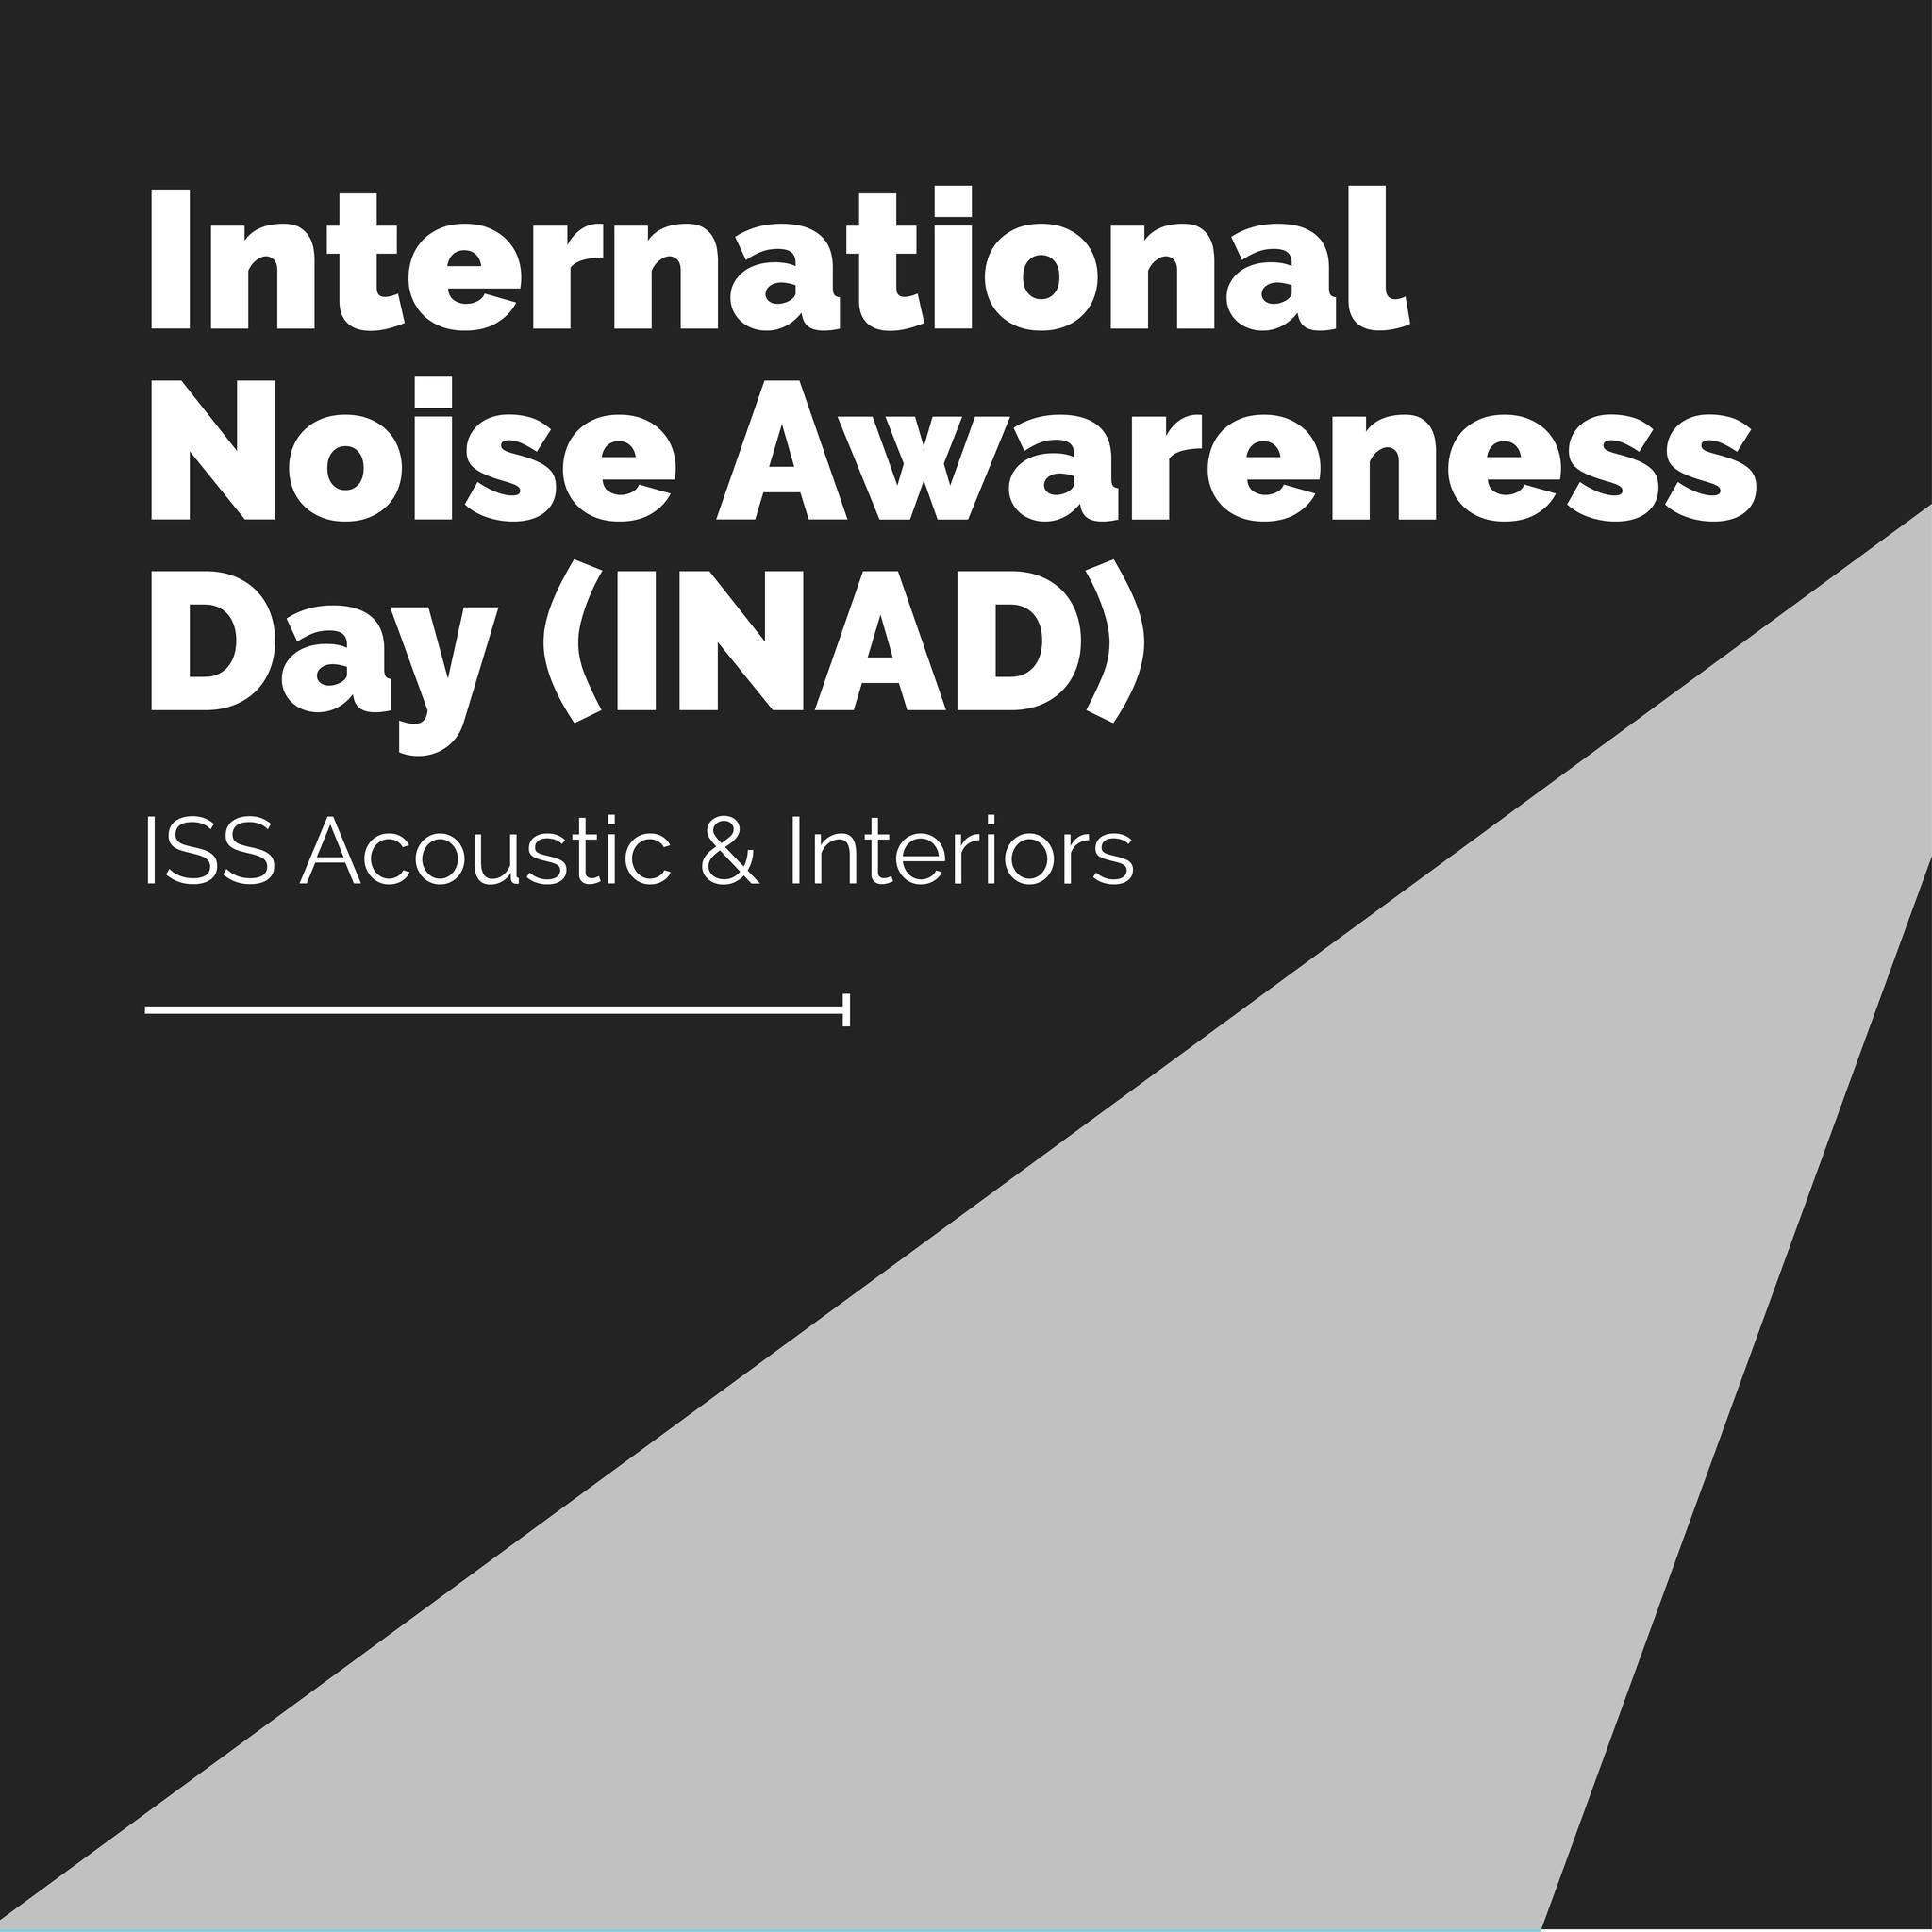 International Noise Awareness Day was established in 1996 to encourage individuals, communities, and organisations around the world to take action to reduce noise pollution and protect your hearing.

Here's a breakdown of why INAD exists and the harm